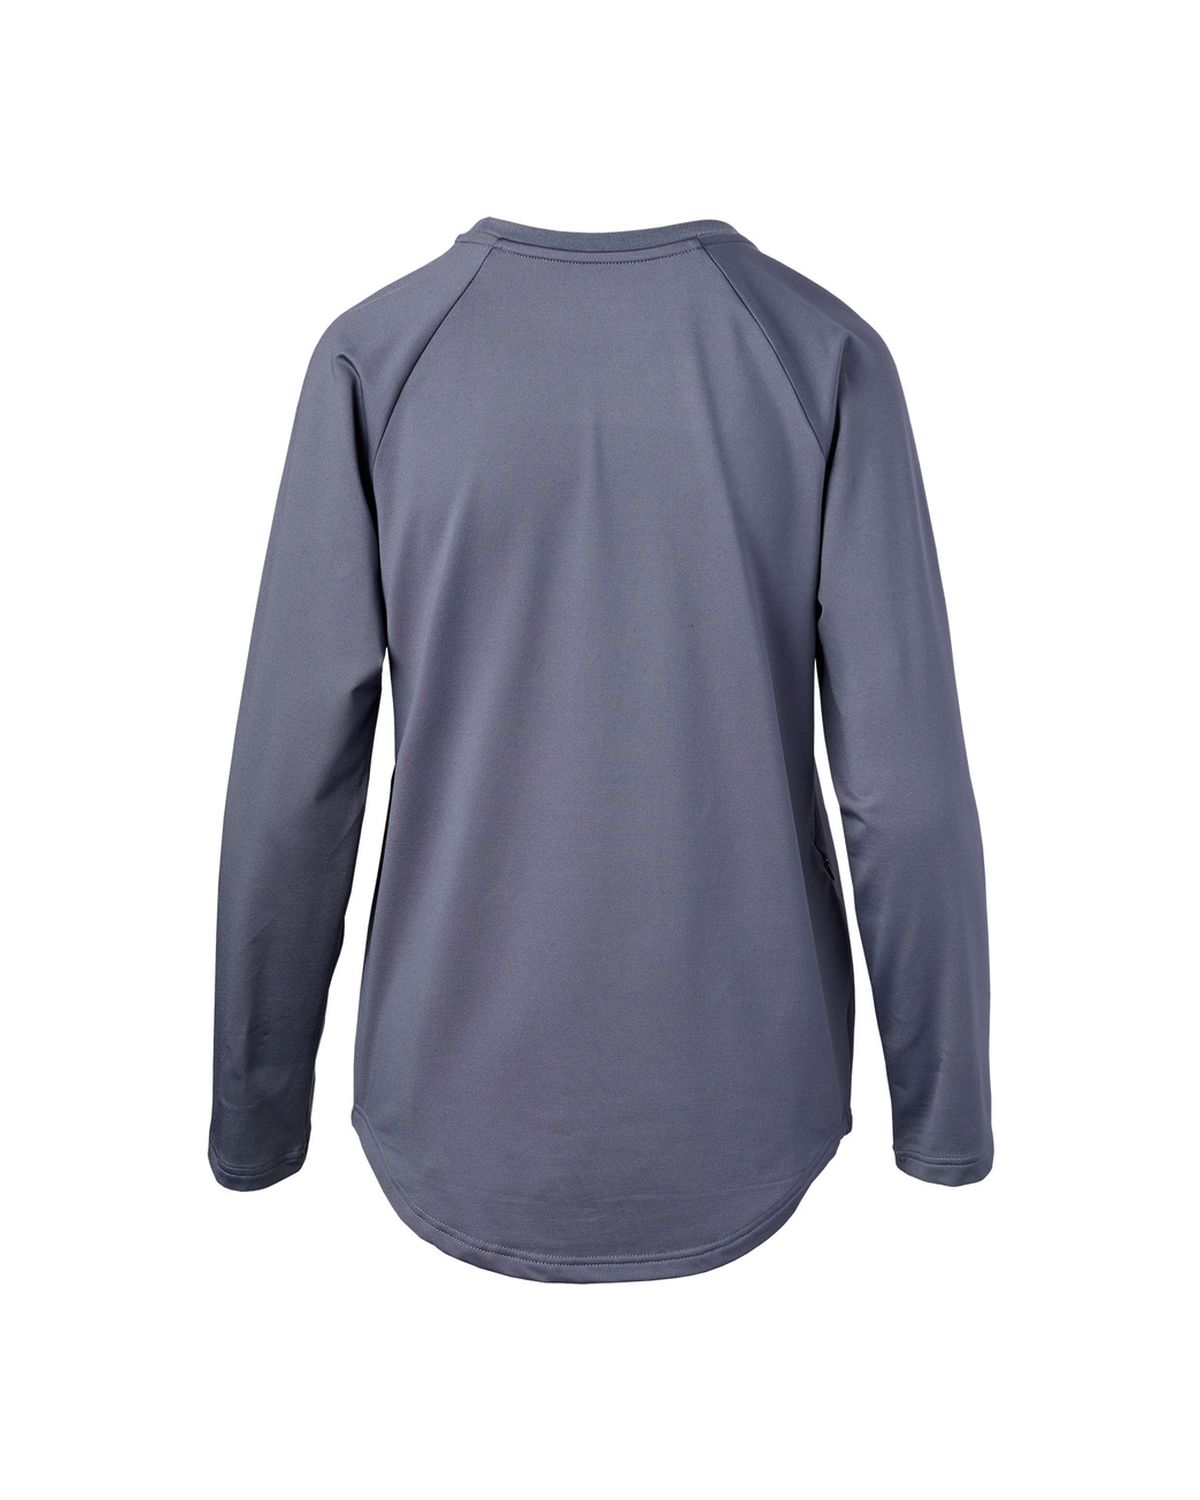 'Soffe 1576V Womens Fearless Pullover'